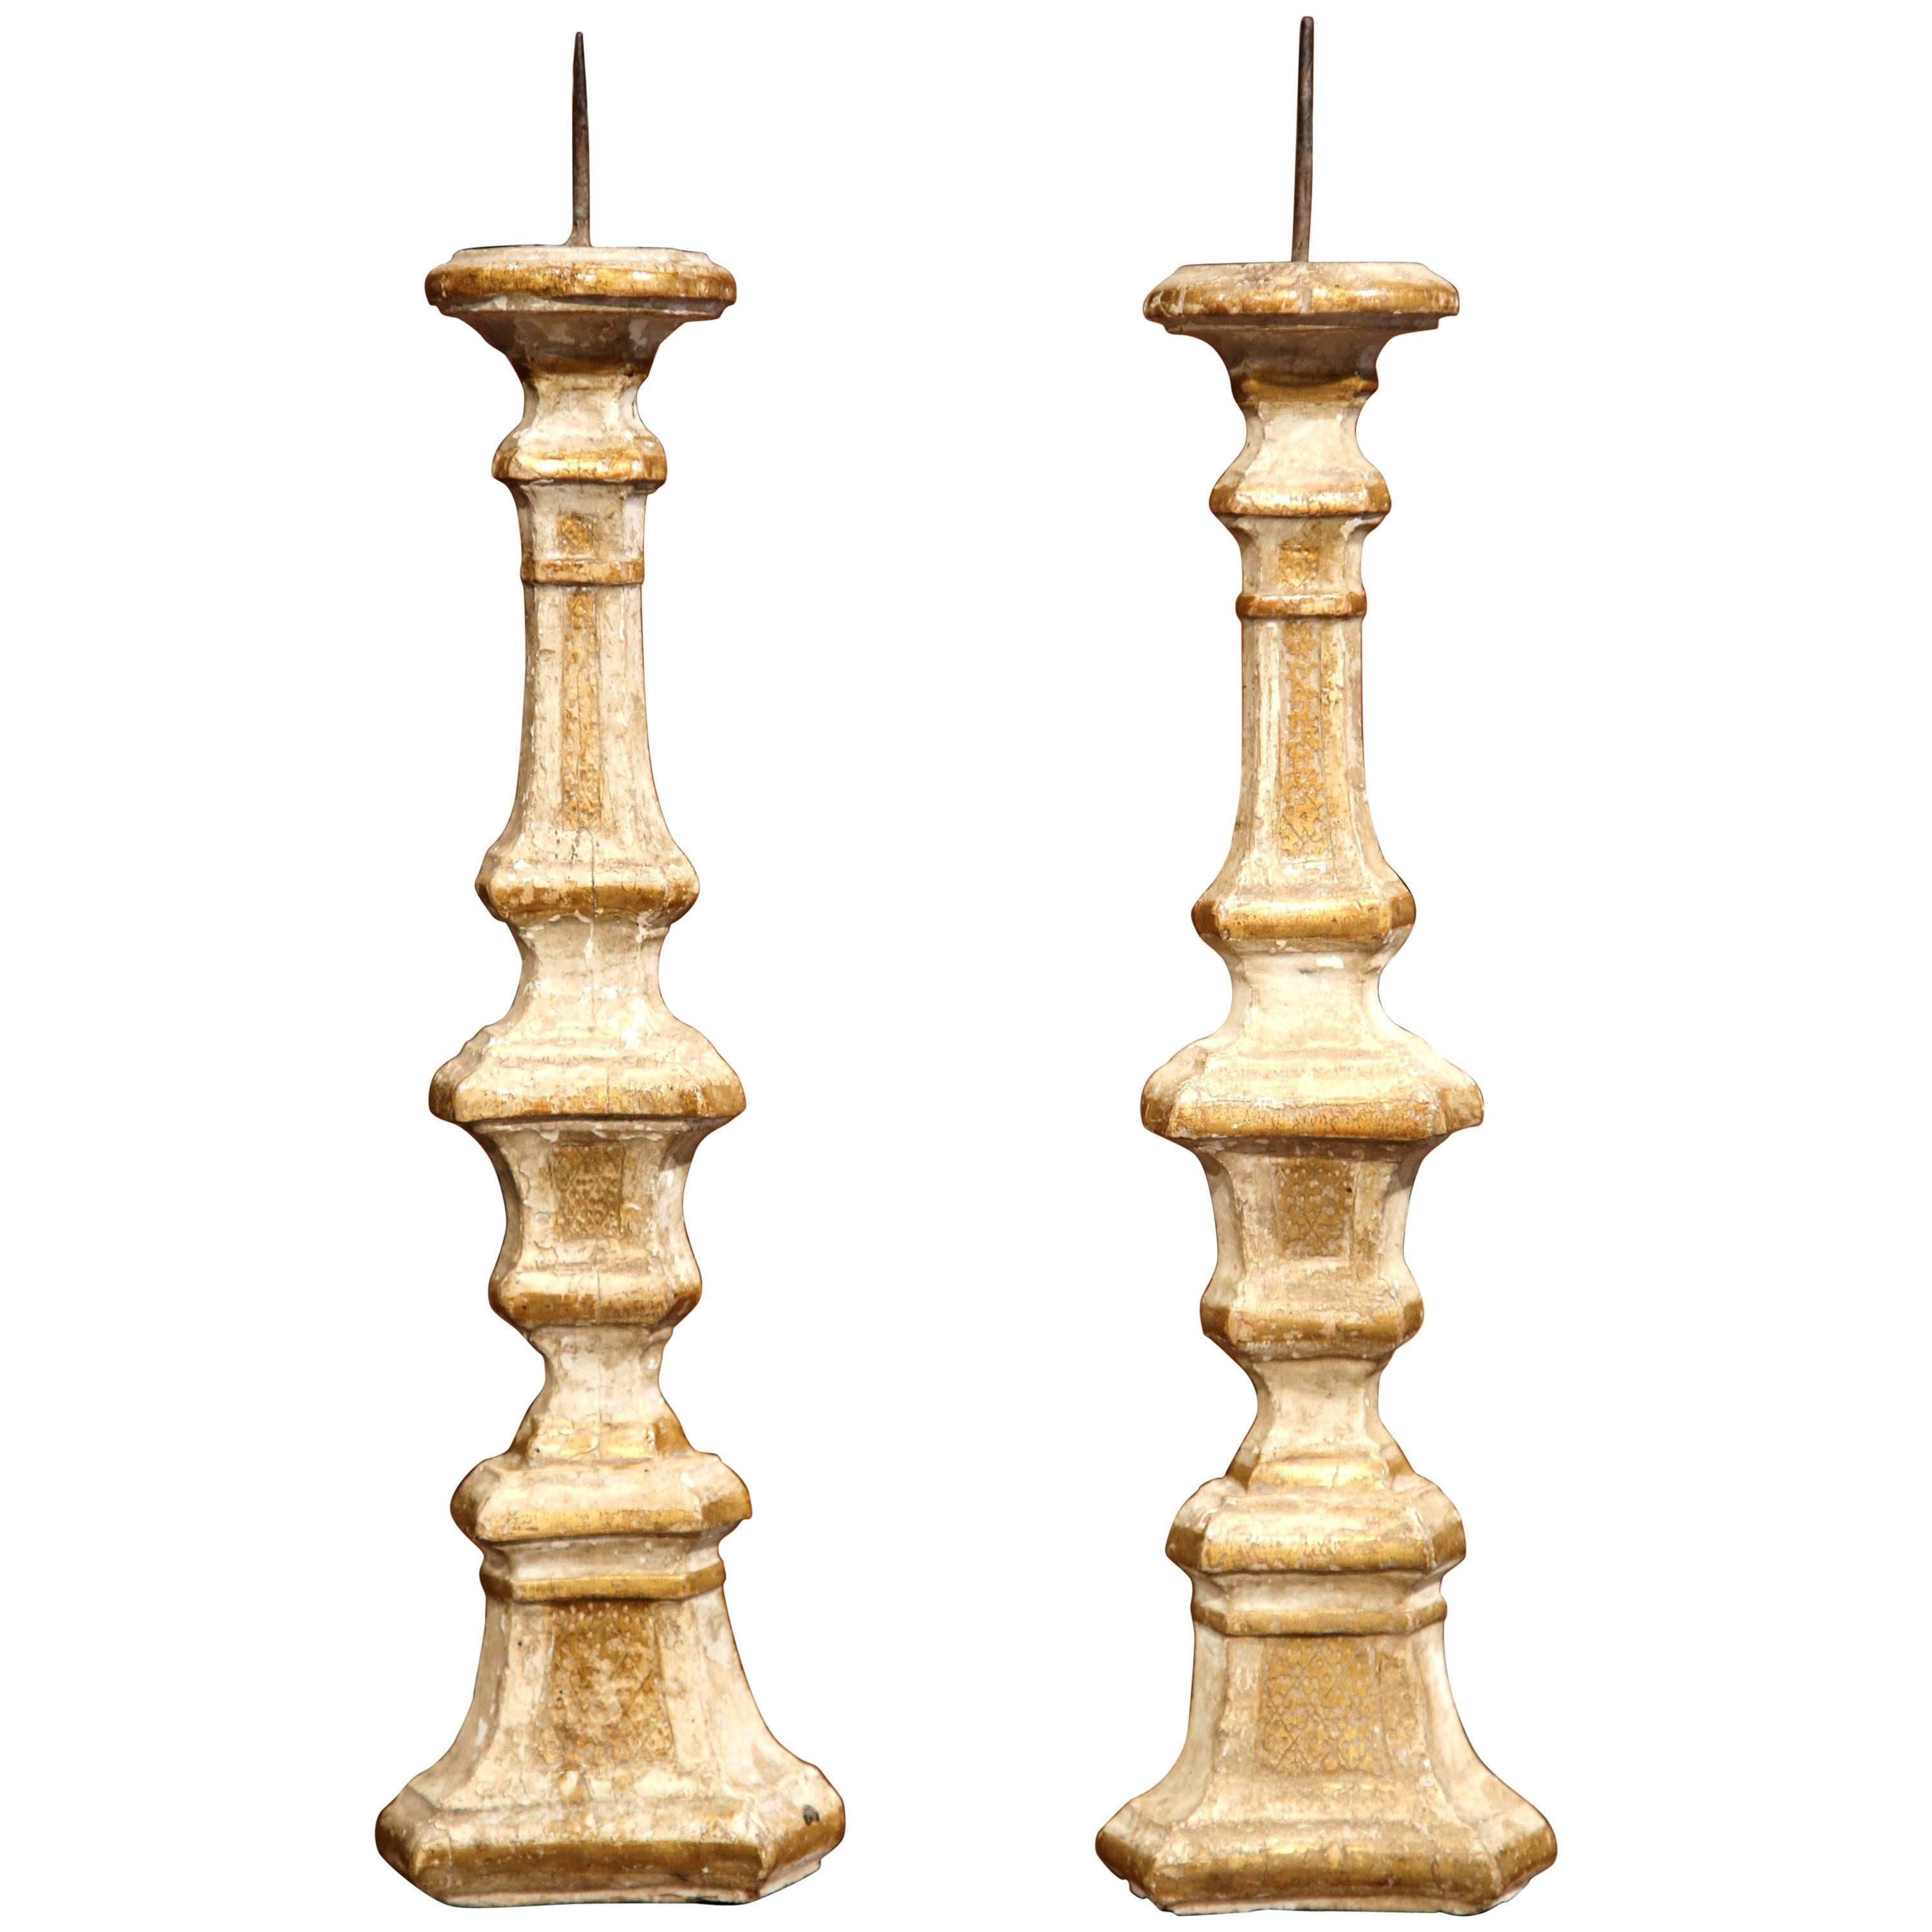 Pair of 19th Century French Carved and Gilt Altar Sticks with Engraving Decor